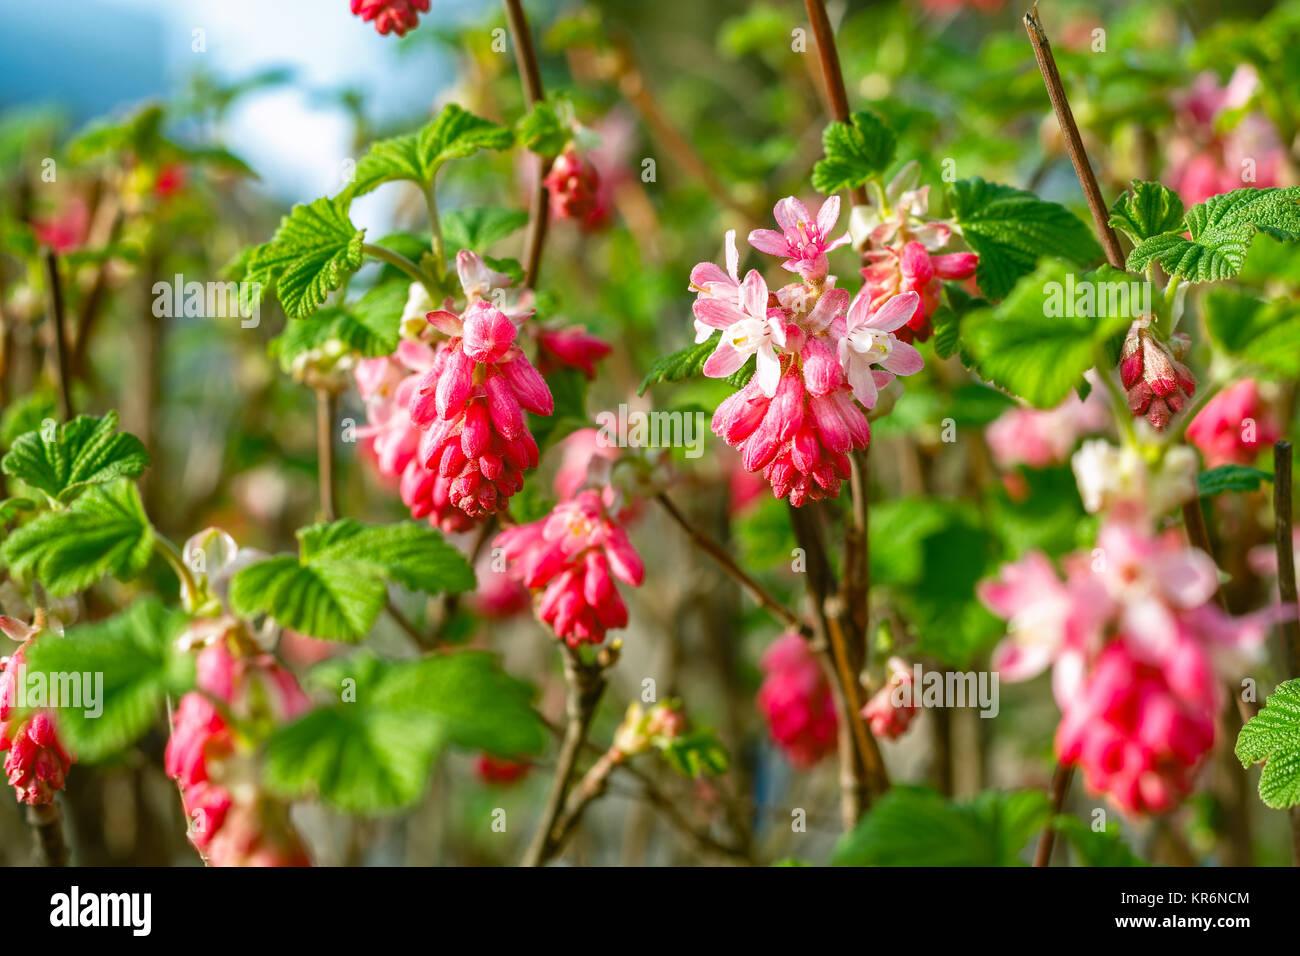 Ribes flowering currant in a public park in London Stock Photo